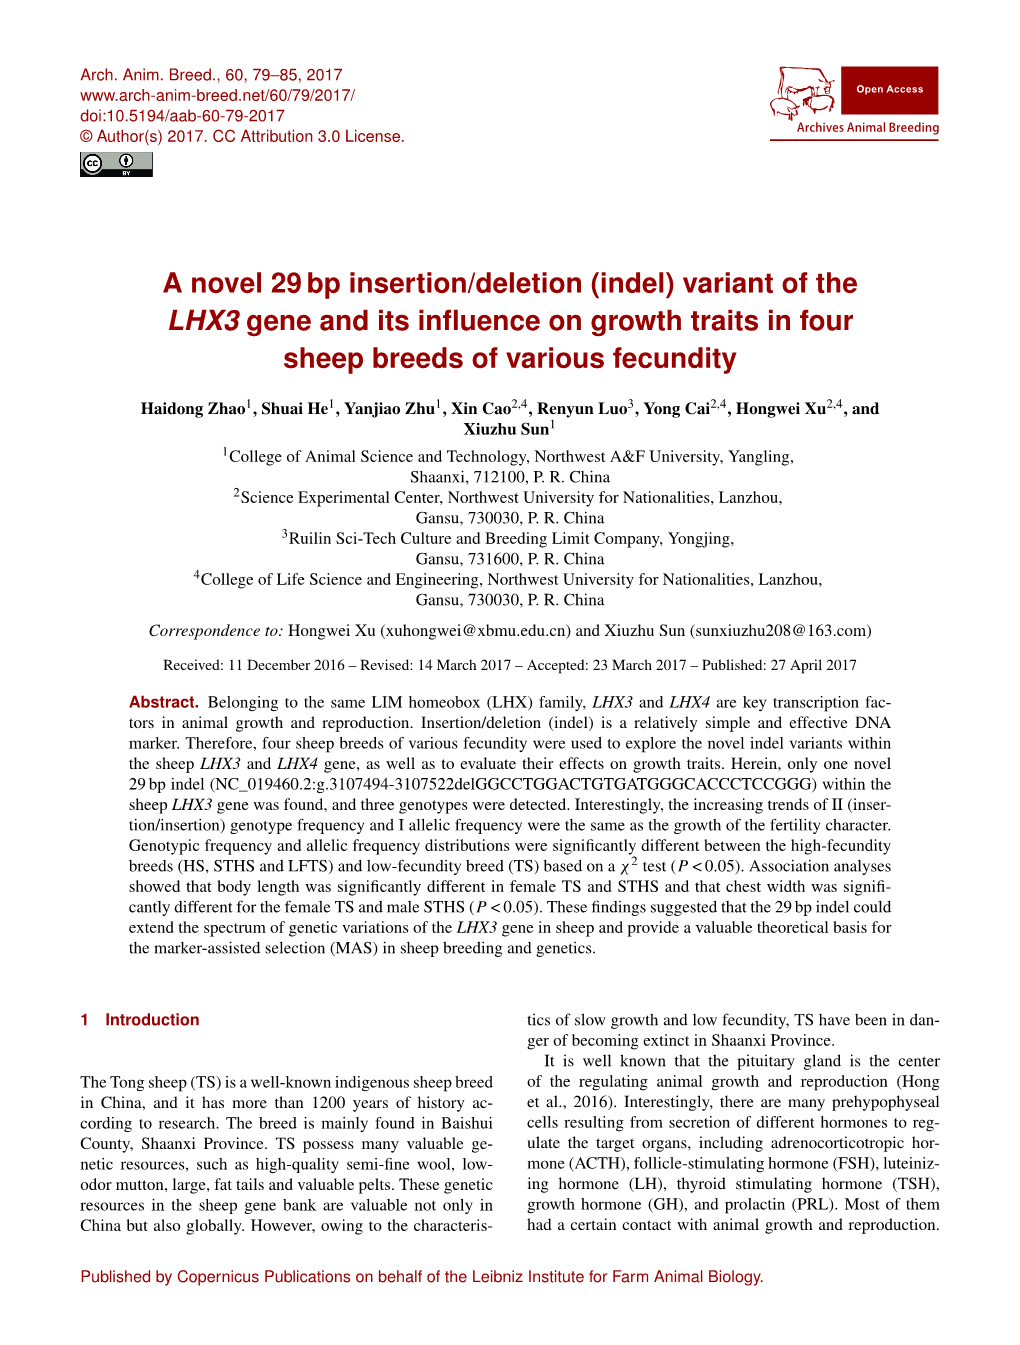 A Novel 29 Bp Insertion/Deletion (Indel) Variant of the LHX3 Gene and Its Inﬂuence on Growth Traits in Four Sheep Breeds of Various Fecundity